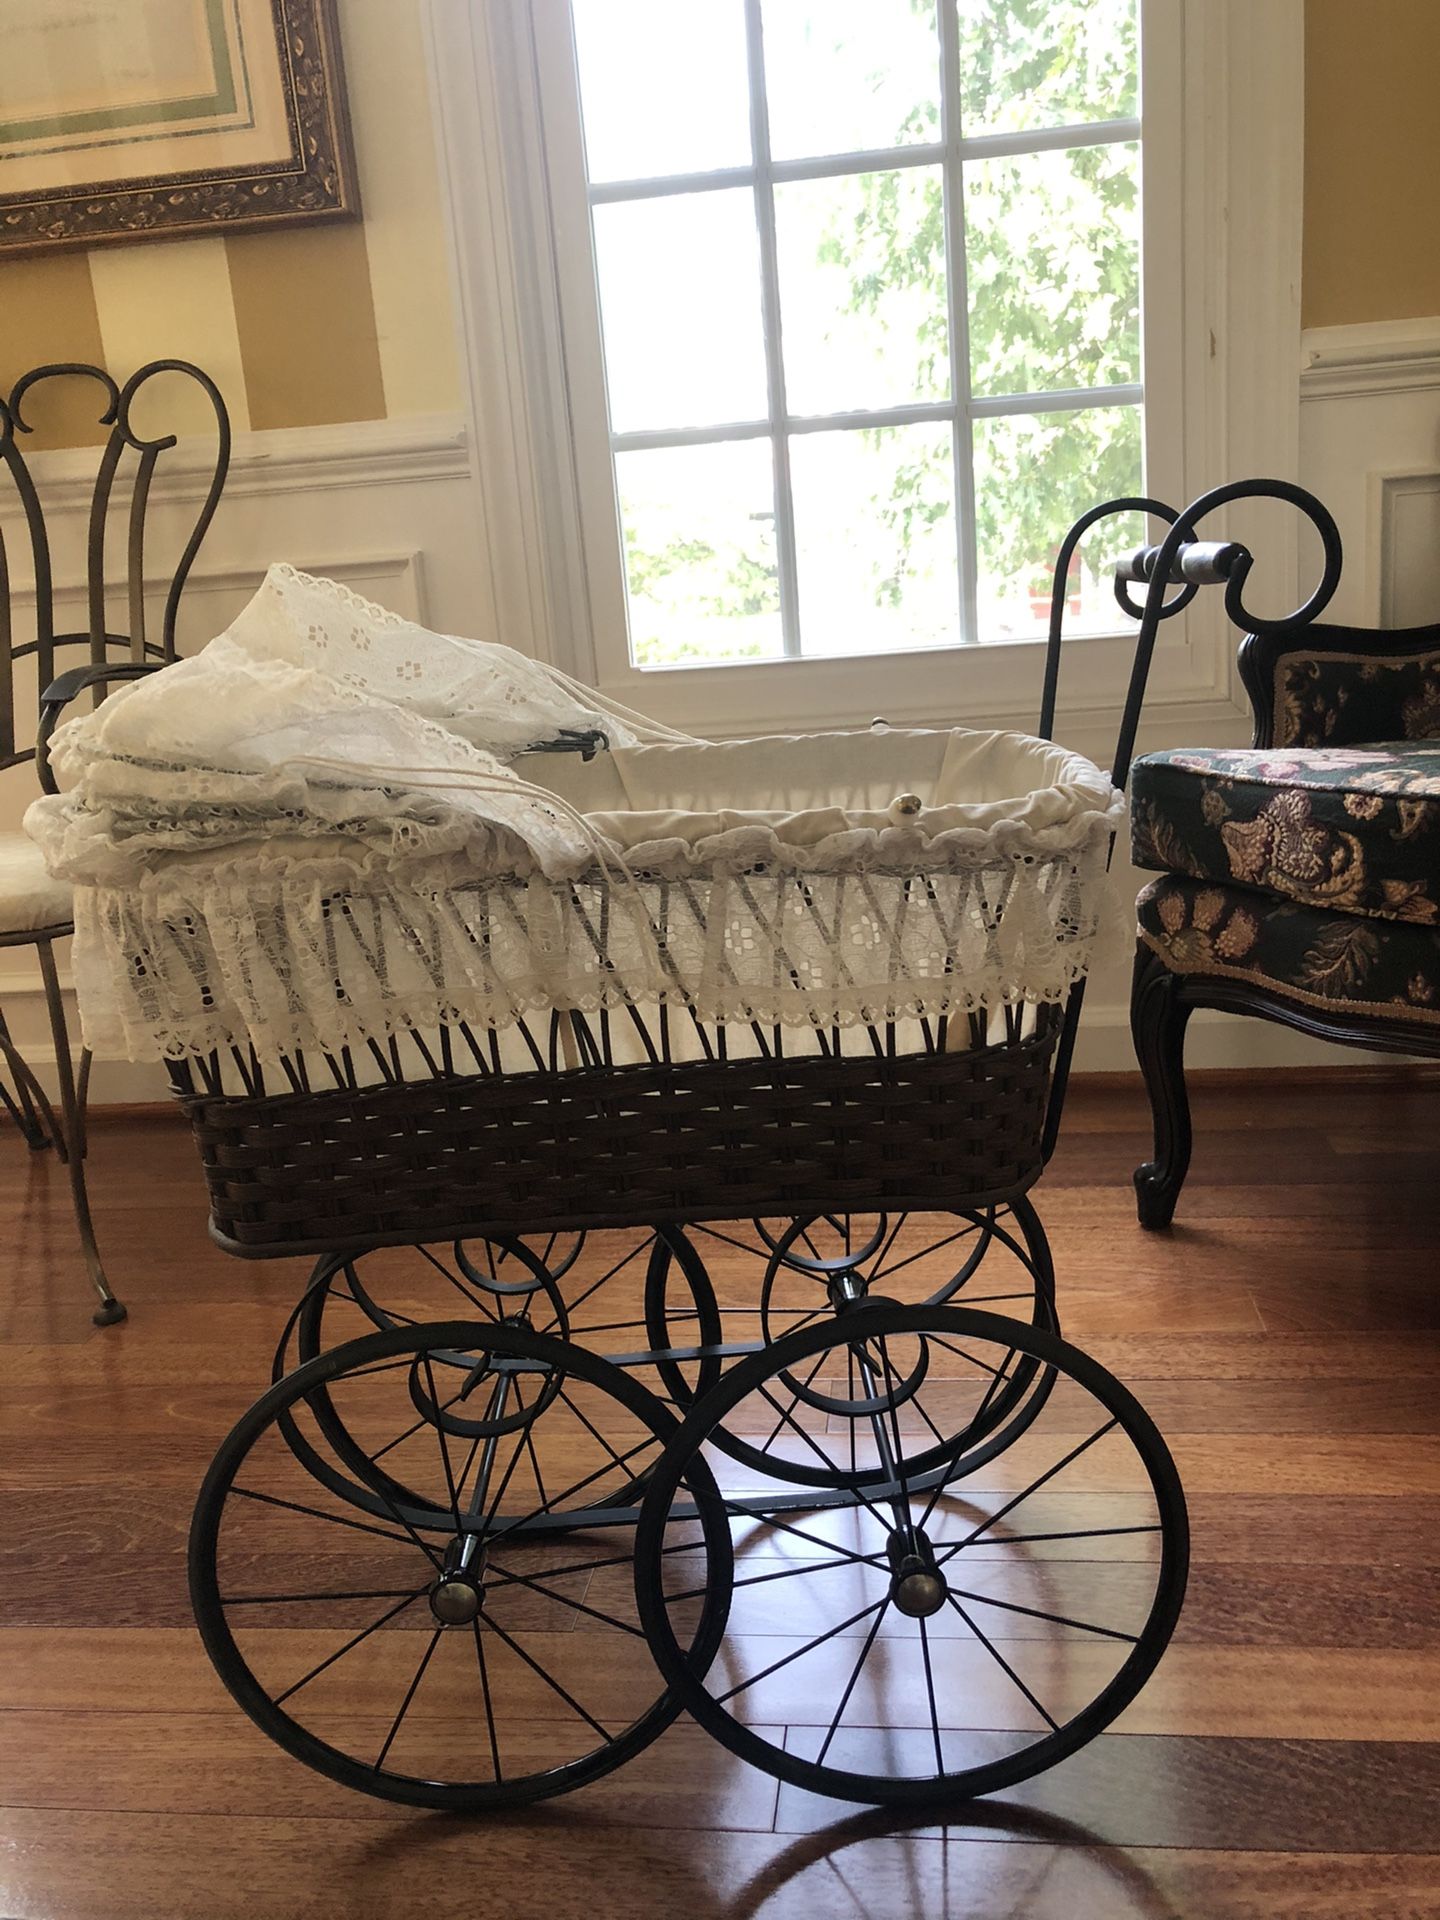 Lace baby doll buggy